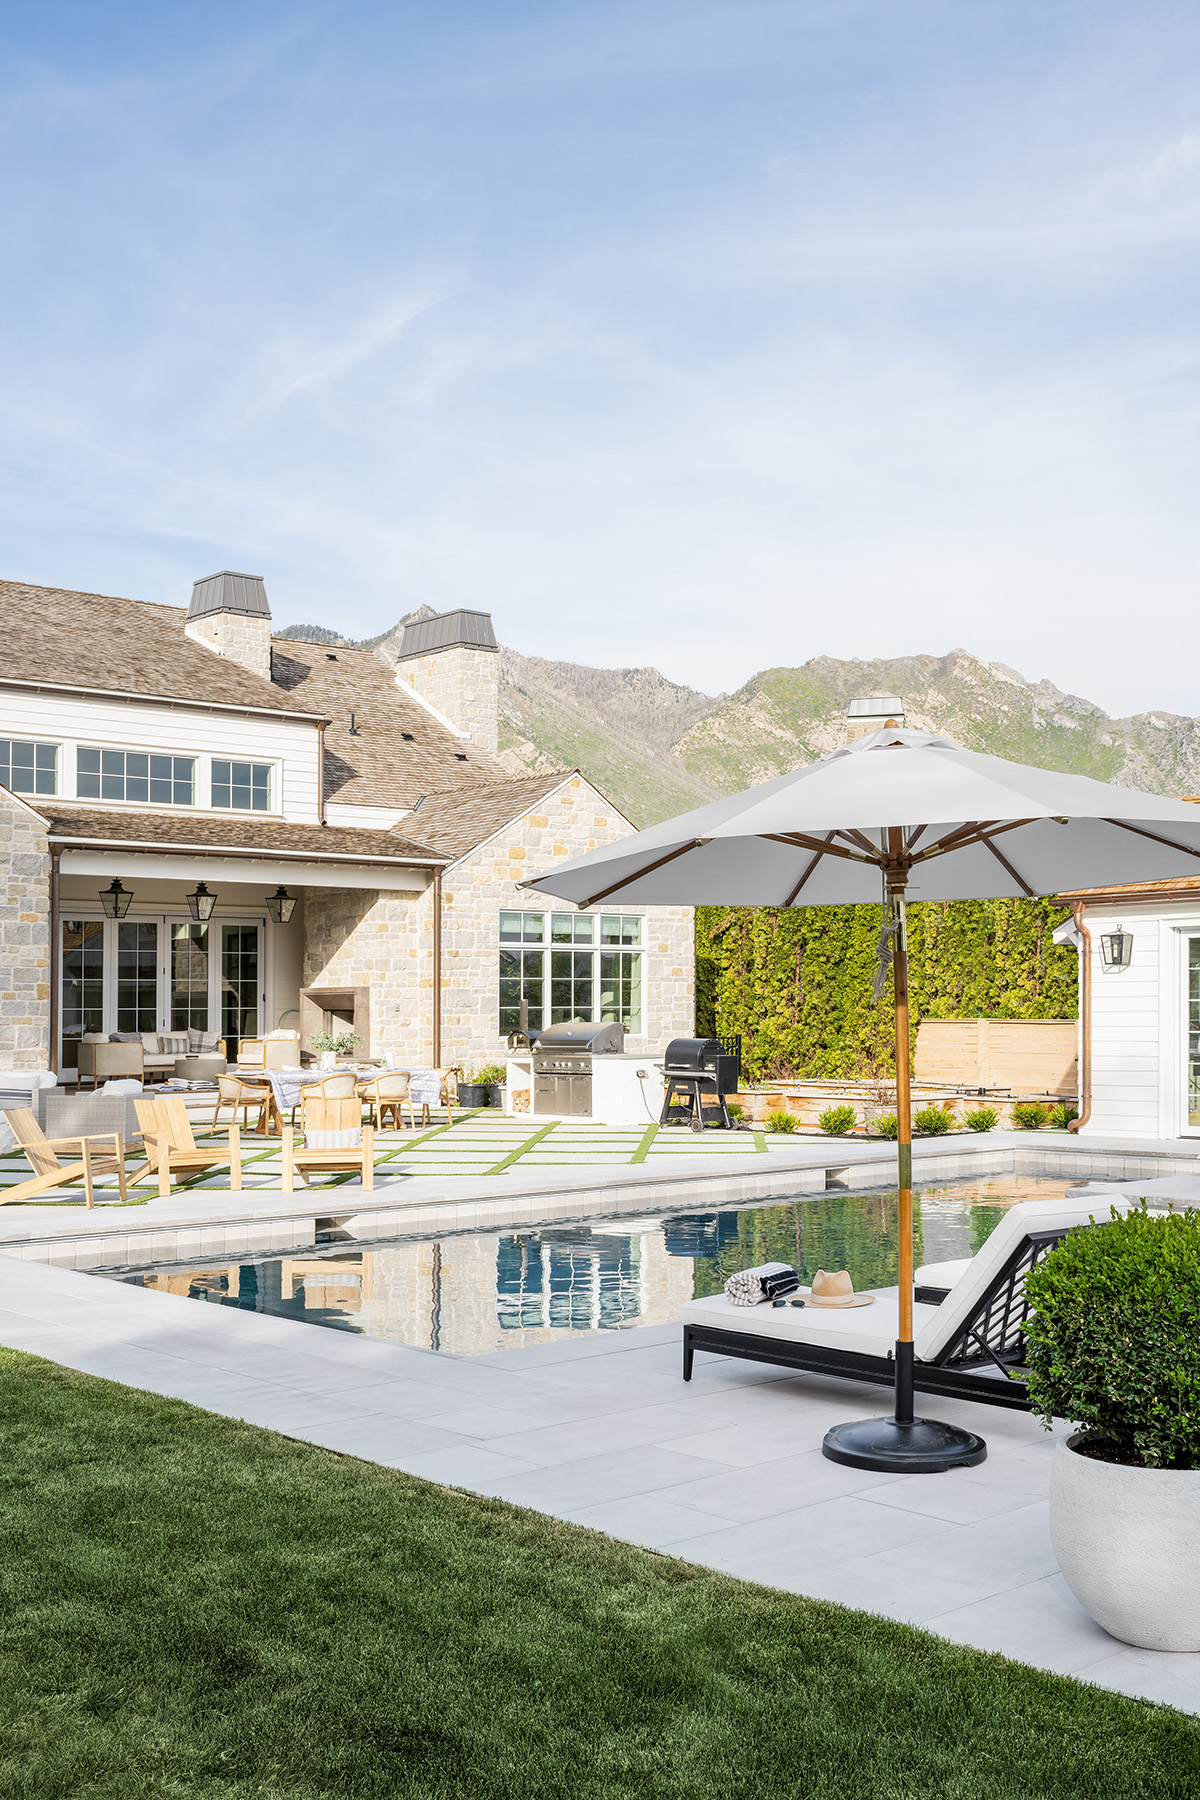 backyard with pool, grill, and outdoor furniture